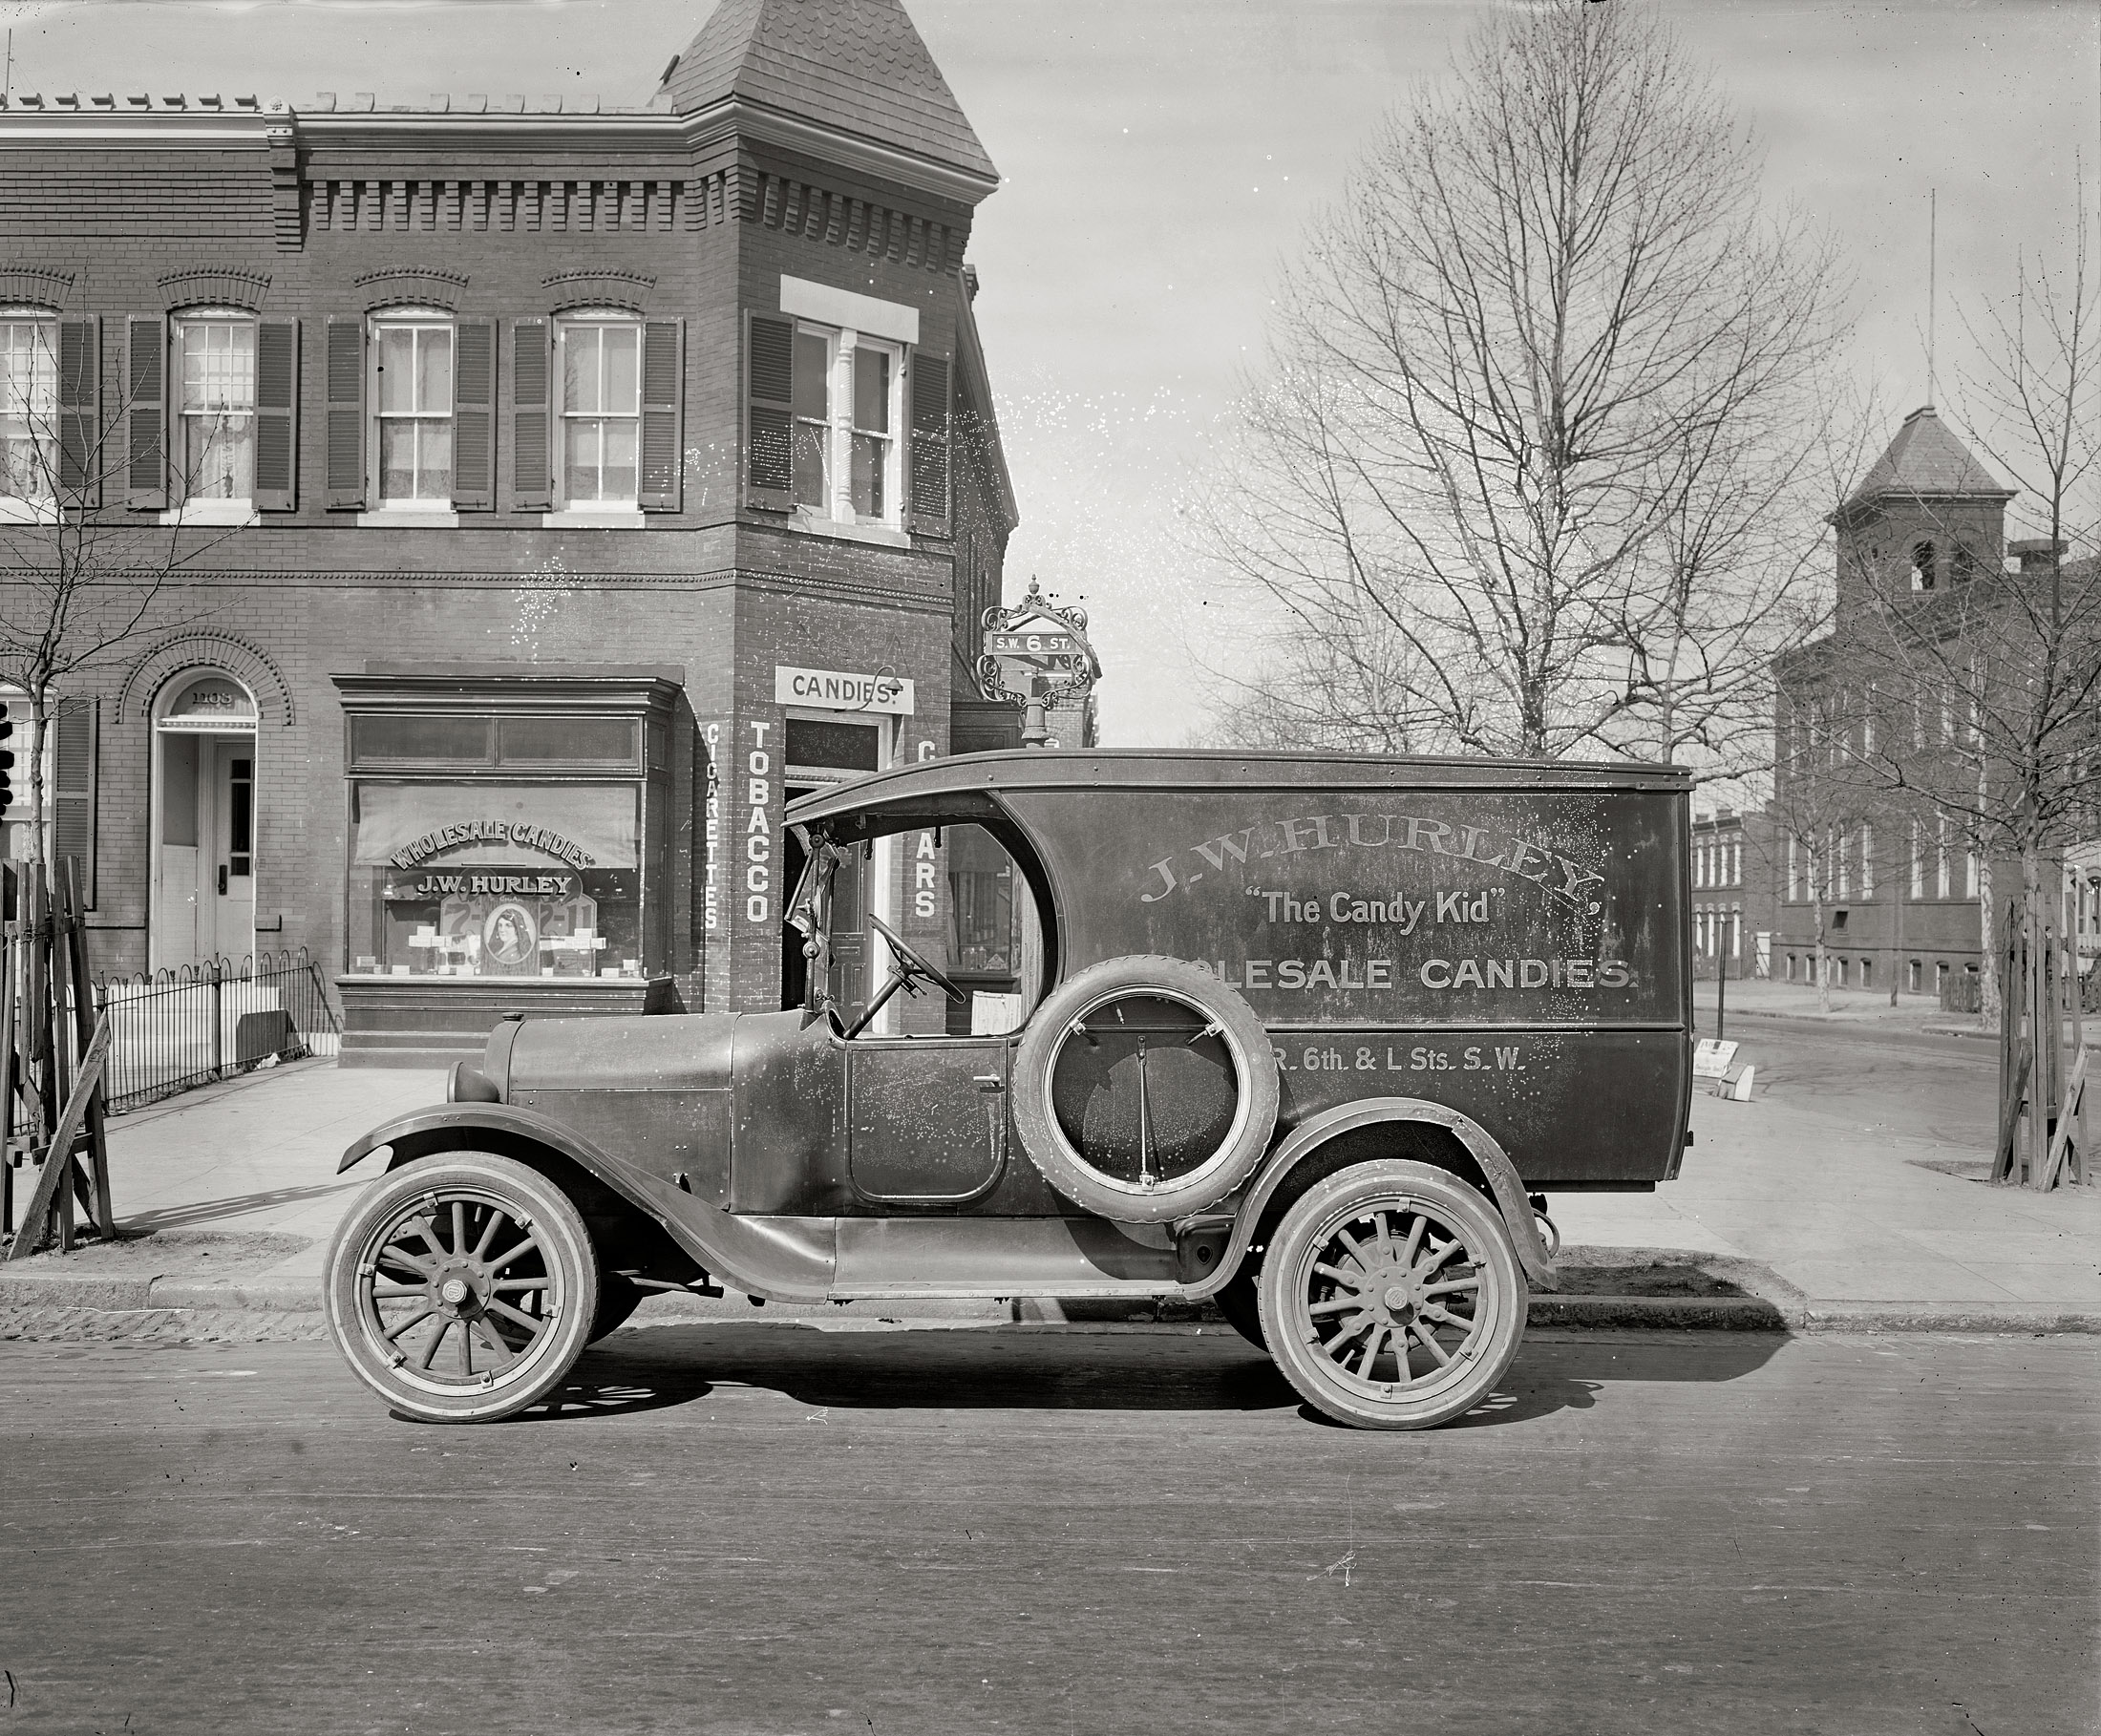 Washington, Sixth and L streets S.W., circa 1926. "Semmes Motor Co. J.W. Hurley truck." National Photo Co. Collection glass negative. View full size.